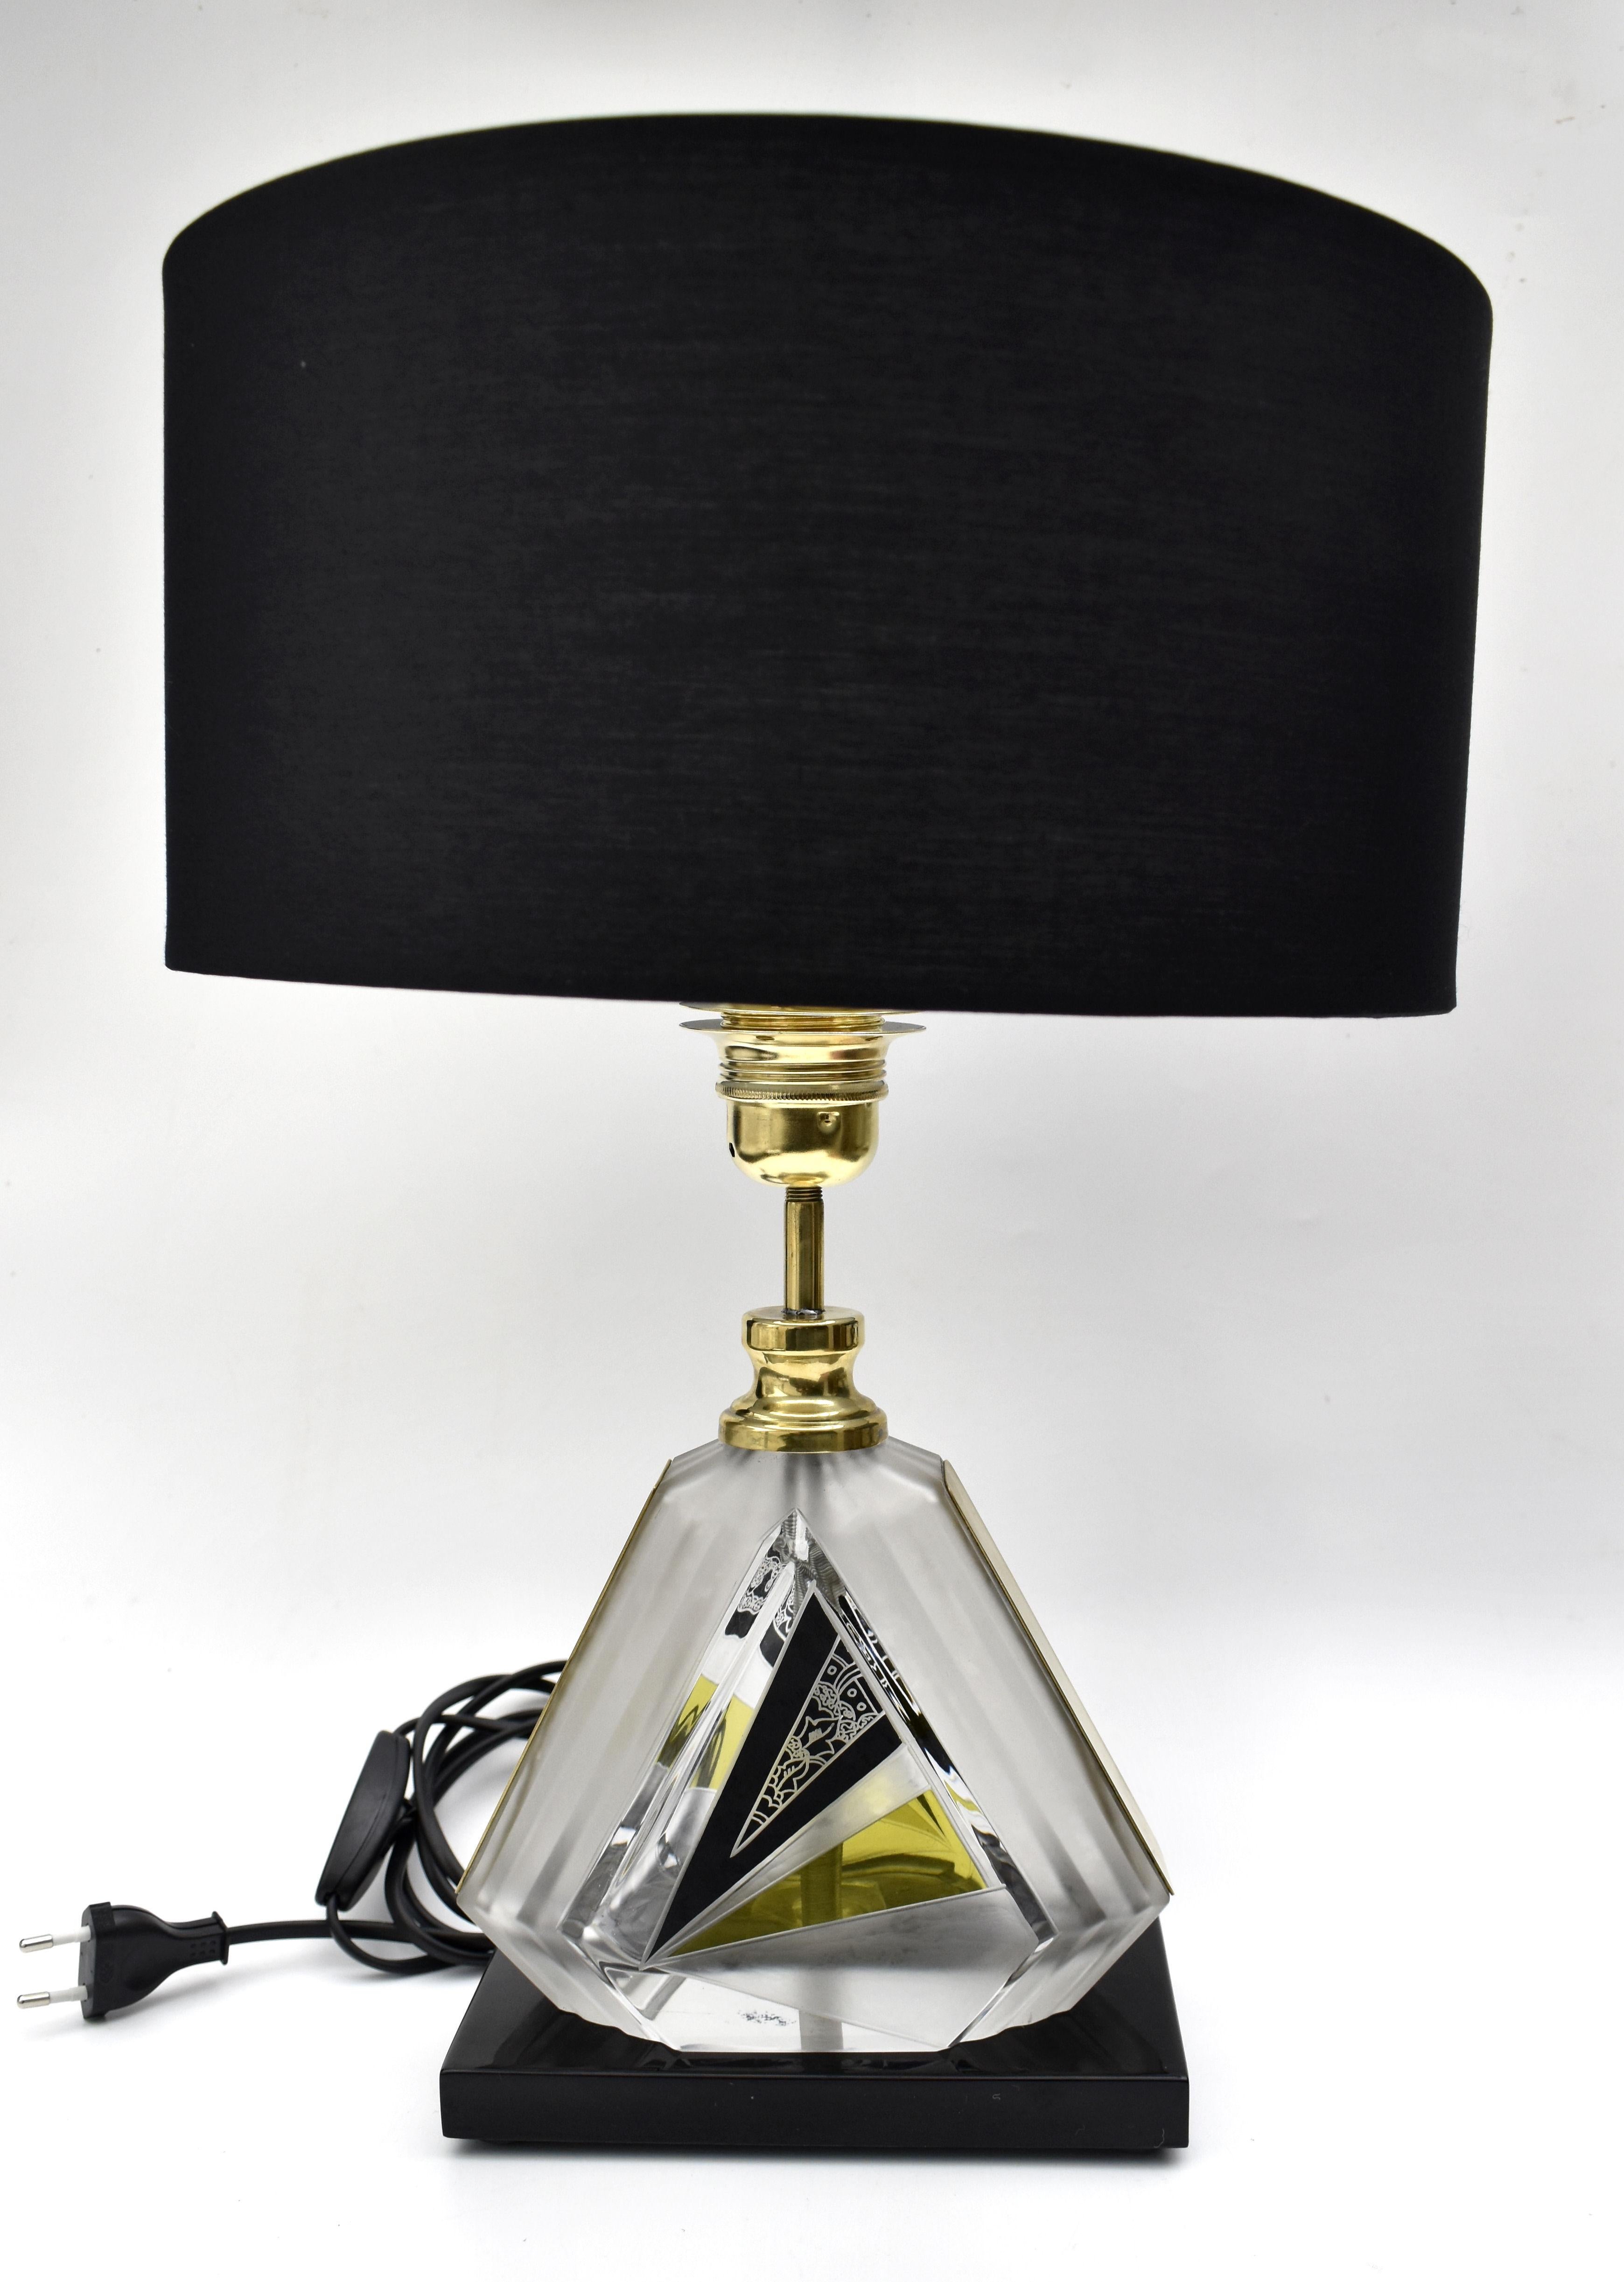 Brass Art Deco Iconic Glass Table Lamp By Karl Palda, c1930 For Sale